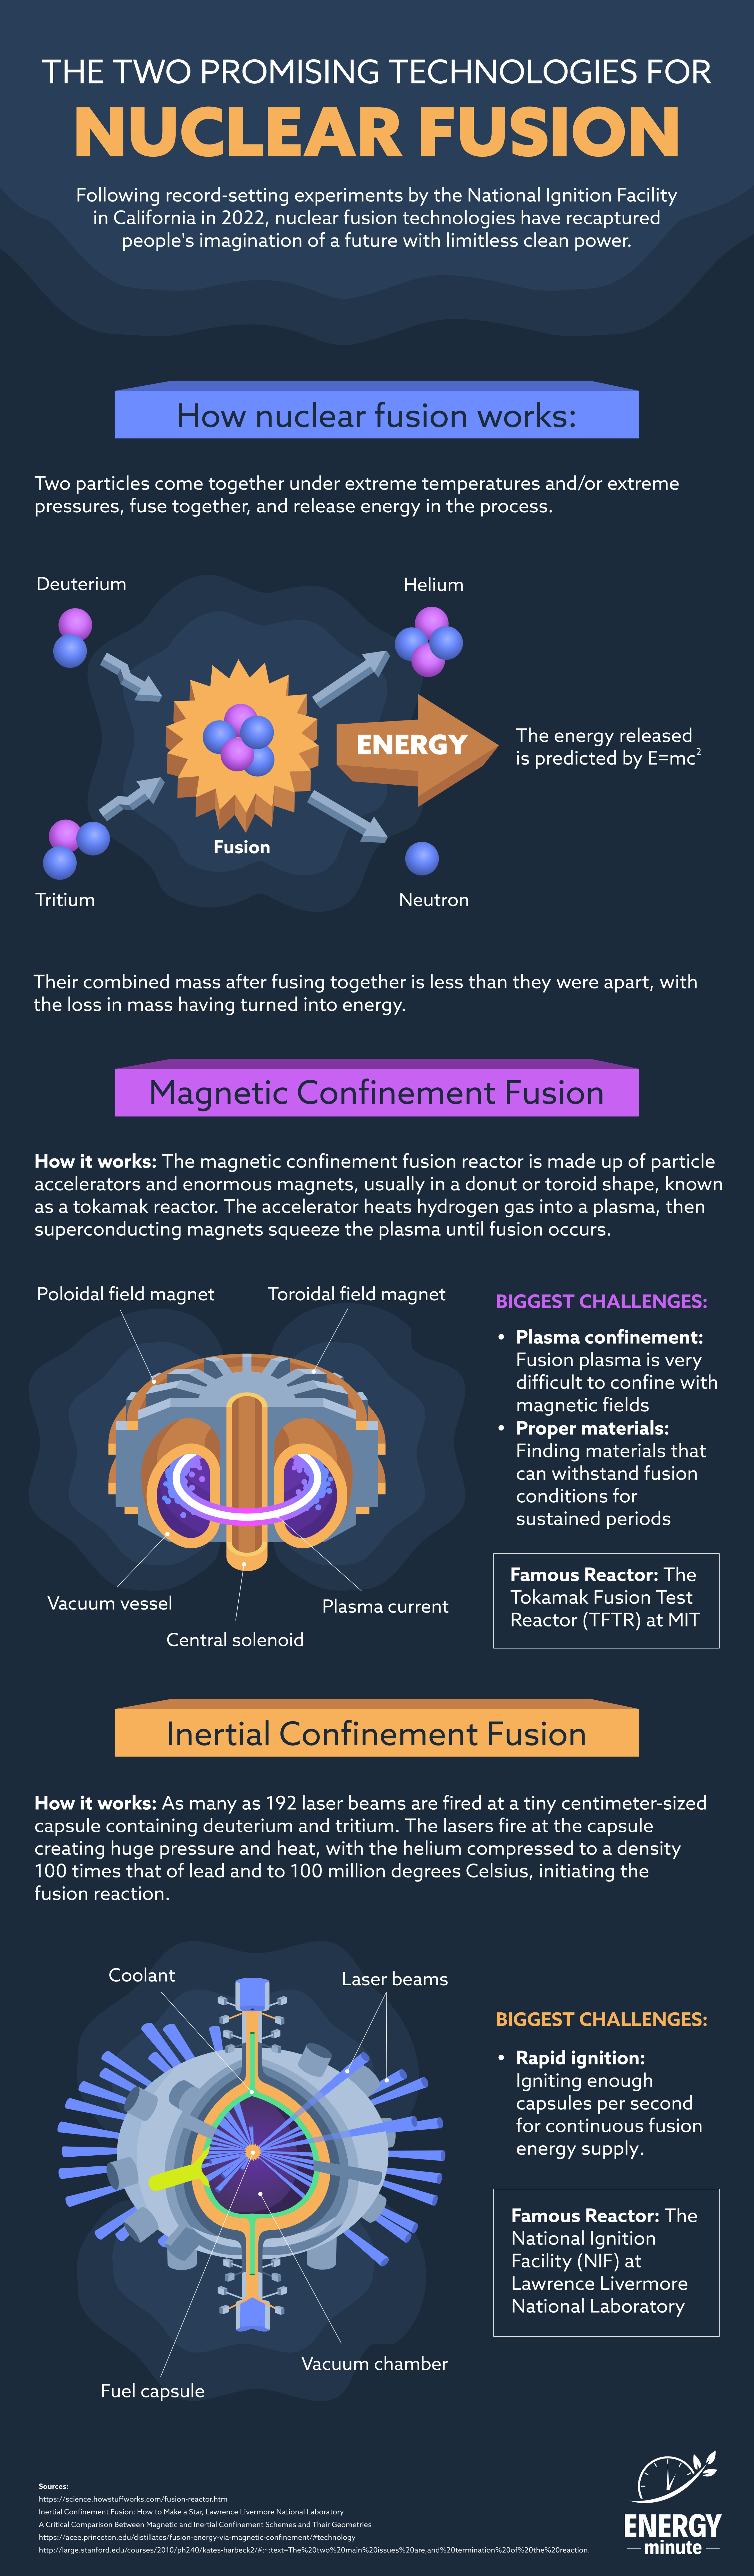 Two nuclear fusion technologies